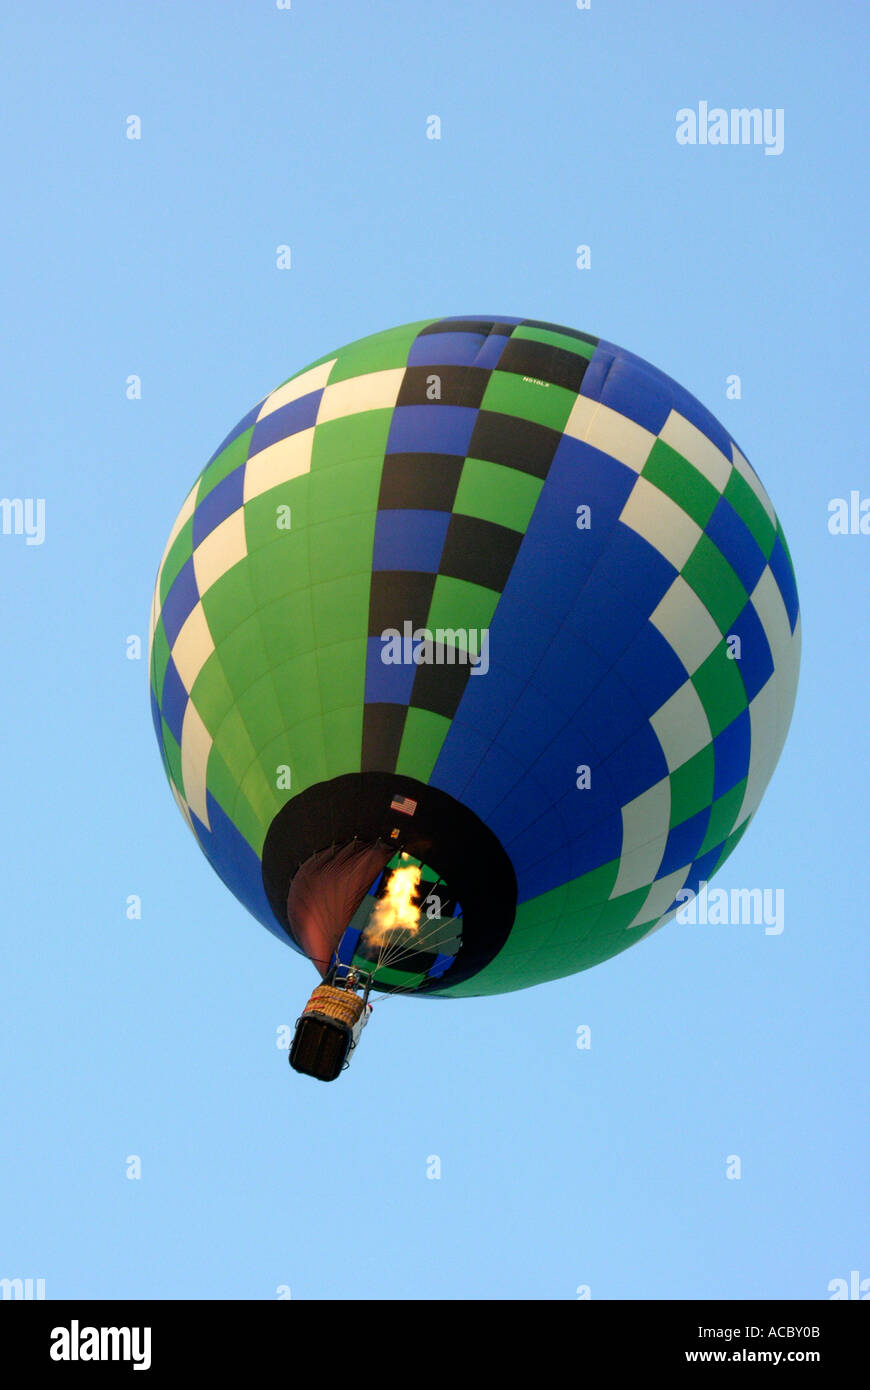 Annual Hot air balloon festival competition held at Howell Michigan Balloon fest Stock Photo